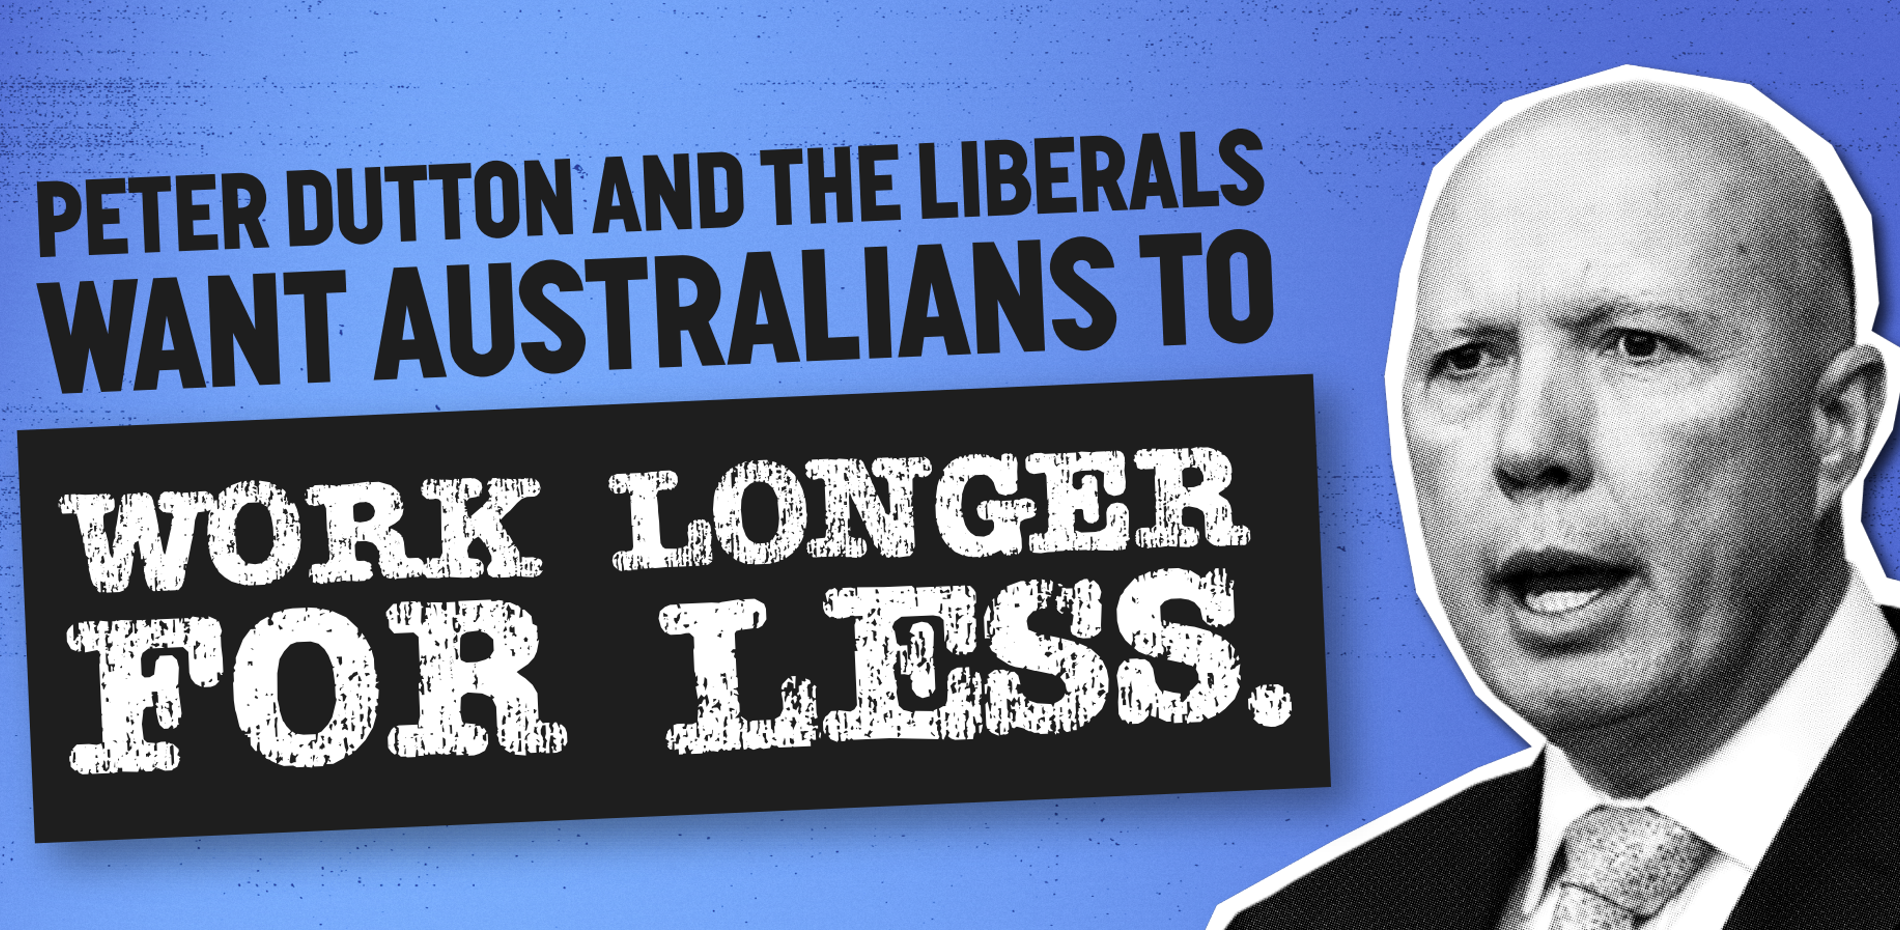 STOP PETER DUTTON AND THE LIBERALS AND NATIONAL’S ATTACKS ON WAGES AND CONDITIONS Main Image